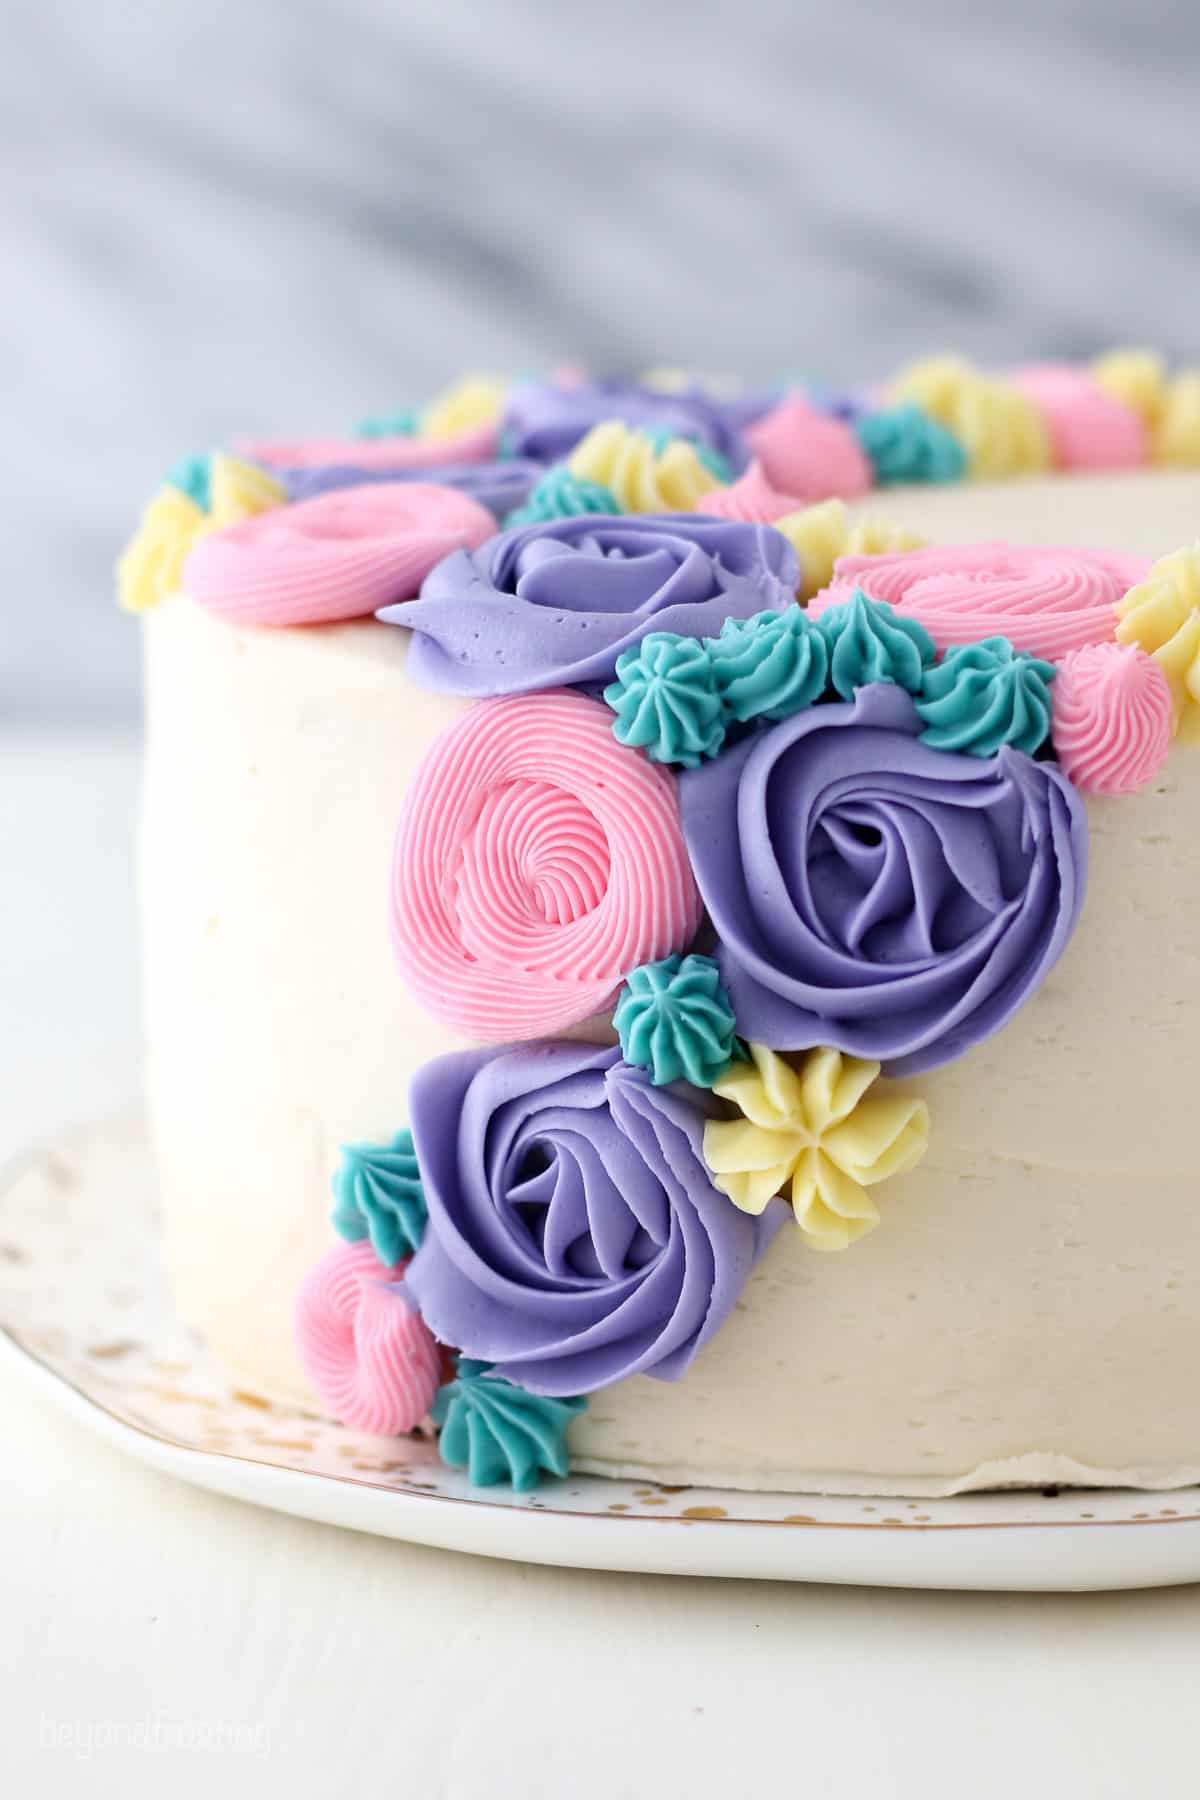 Side view of a buttercream flower cake decorated with pastel frosting rosettes and flowers.